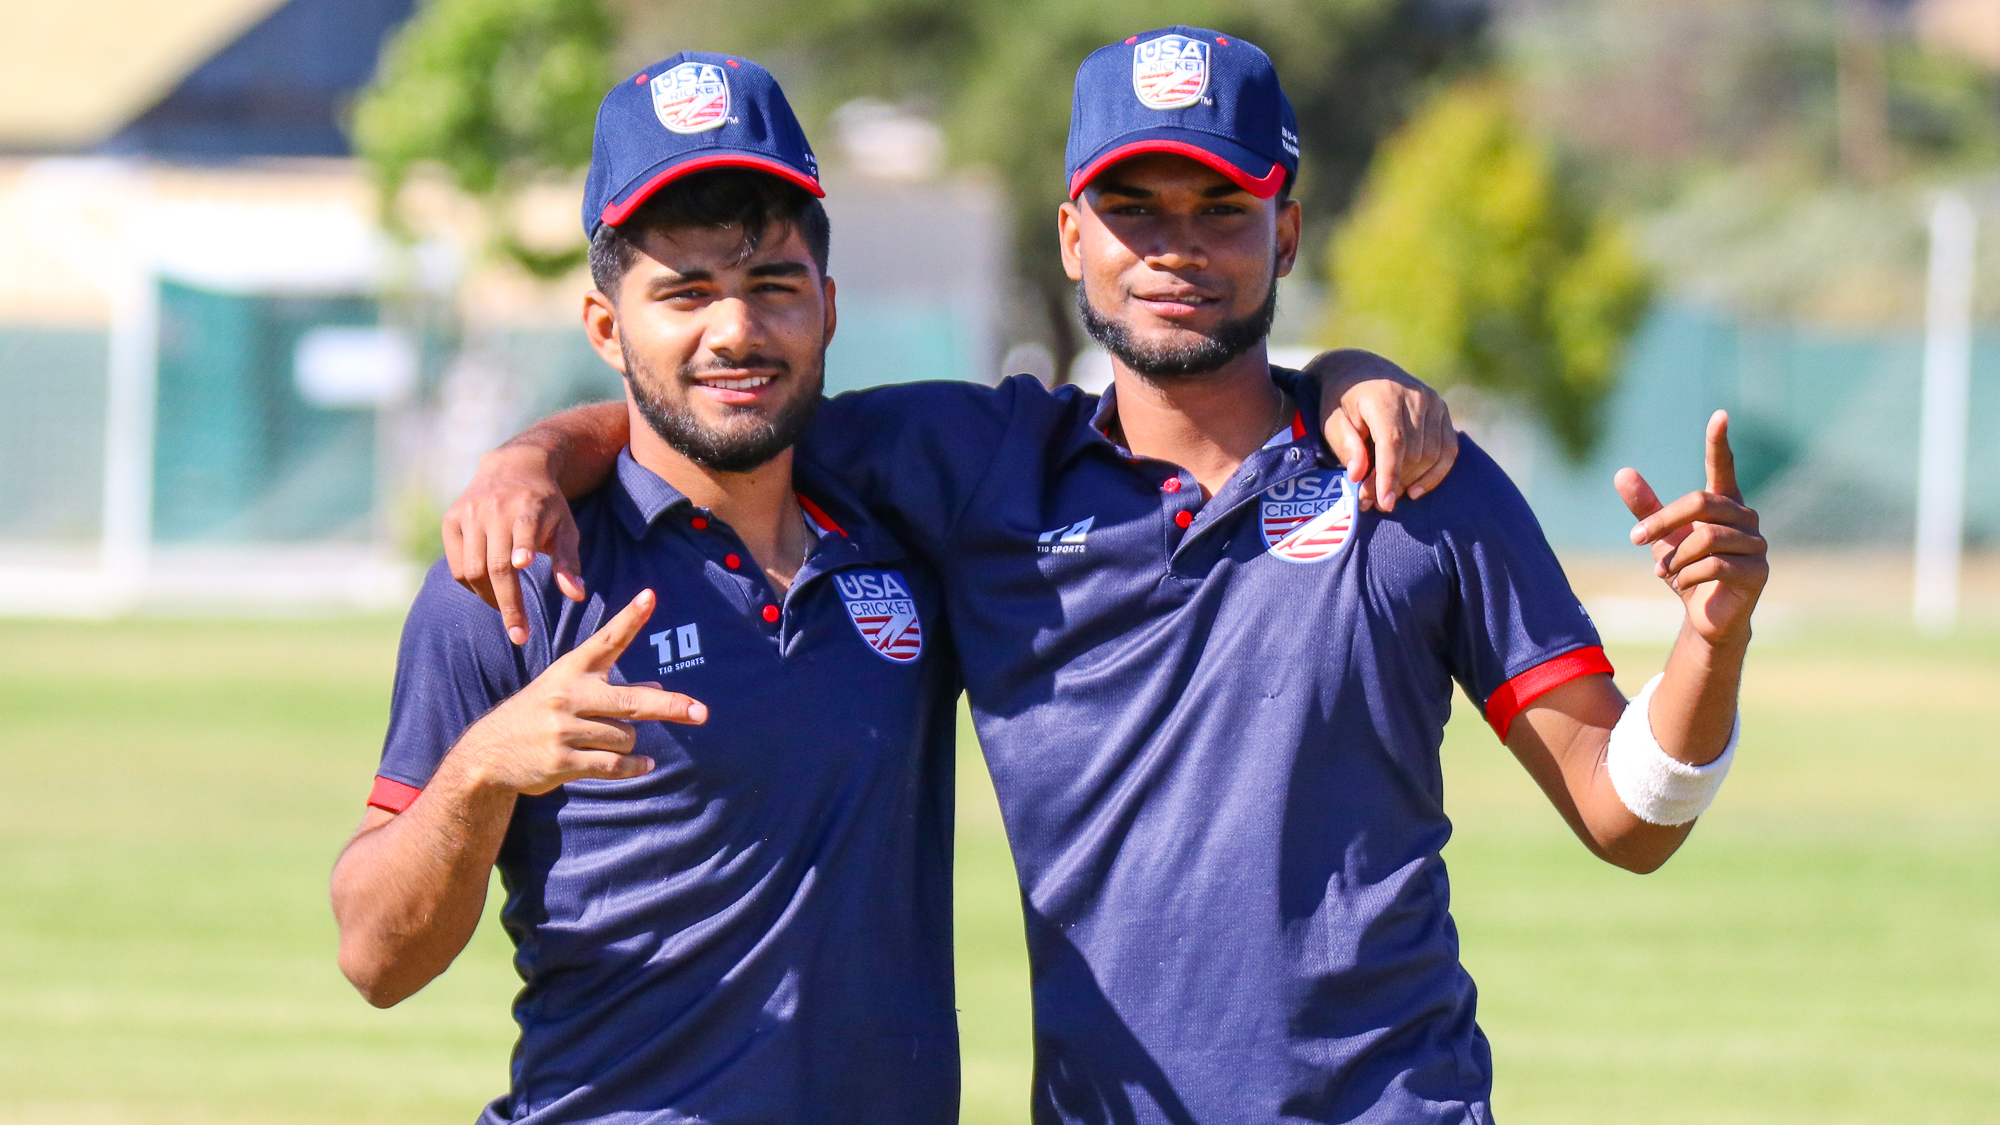 USA Cricket Announces U19 Zonal Trials as First Step on the Road Towards 2024 U19 Cricket World Cup